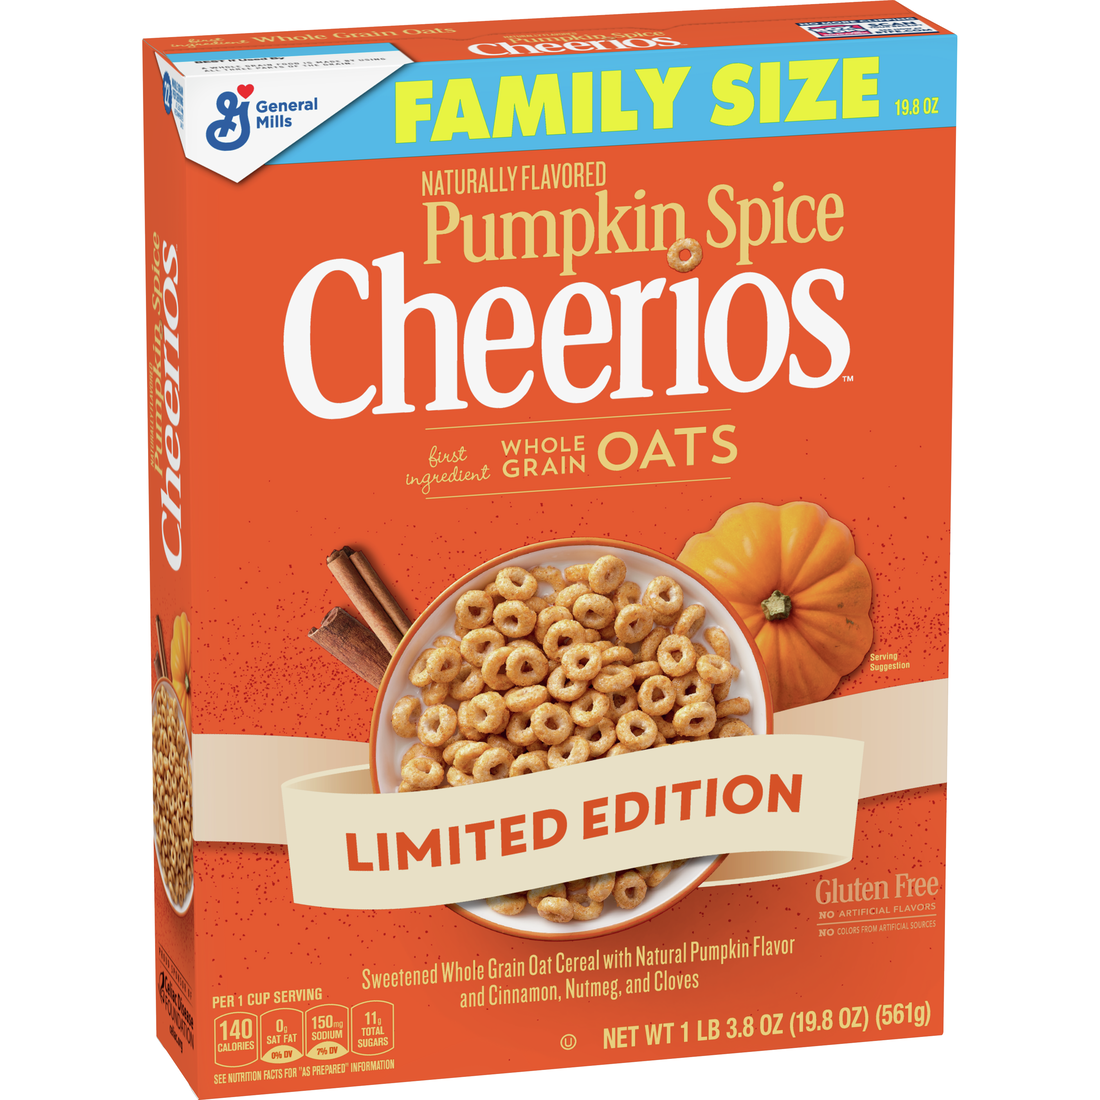 General Mills, Breakfast Cereal, Pumpkin Spice Cheerios, Gluten Free, Family Size, 19.8oz Box - image 1 of 11